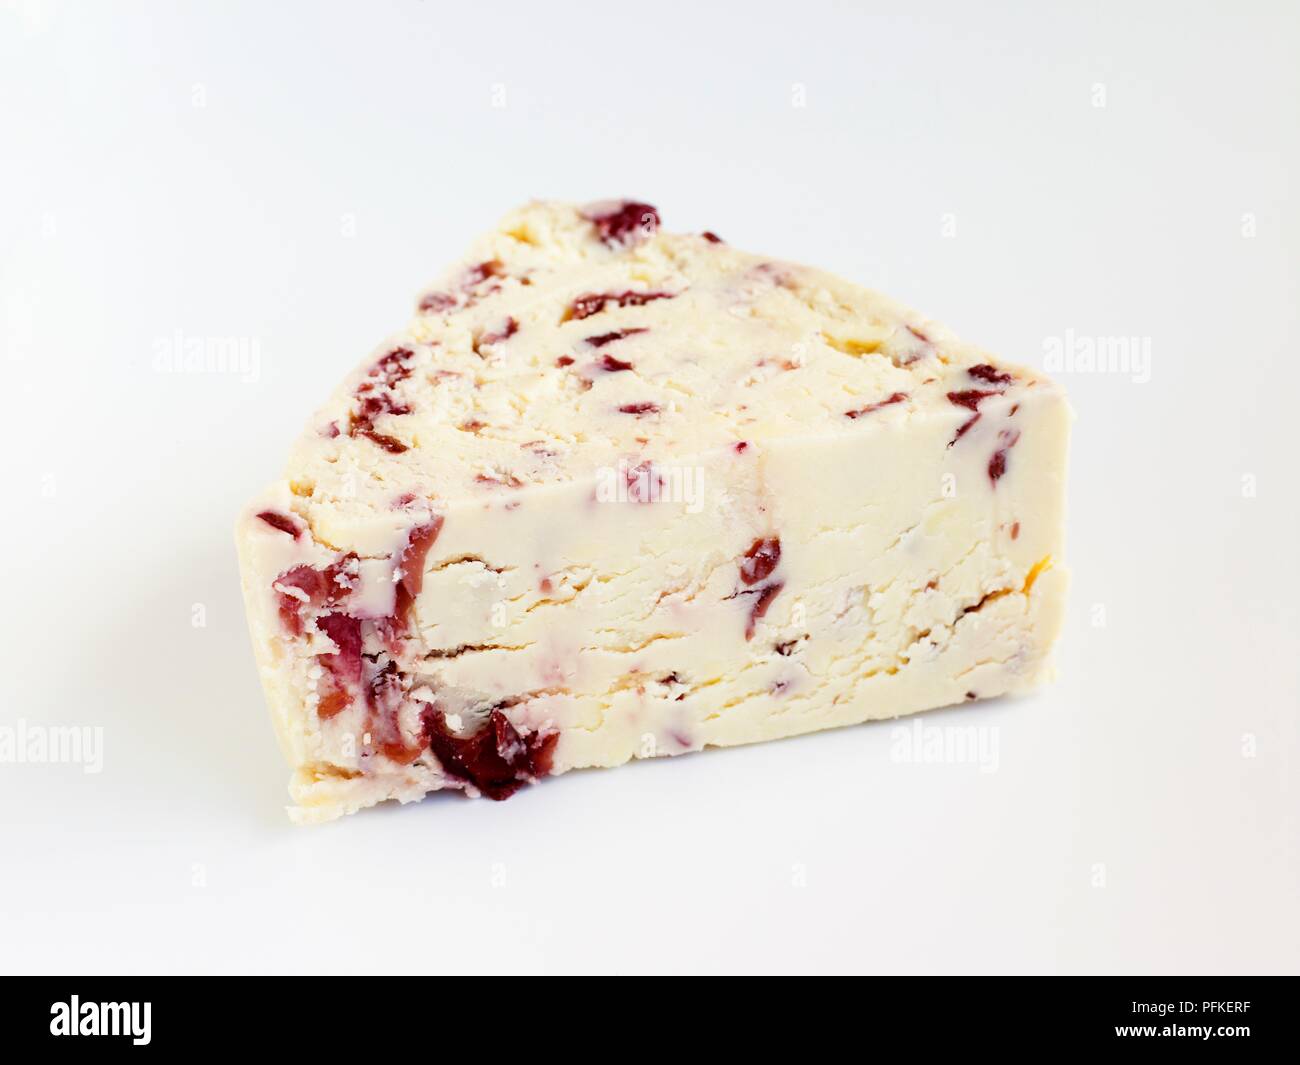 Slice of English Wensleydale cow's milk cheese with cranberries Stock Photo